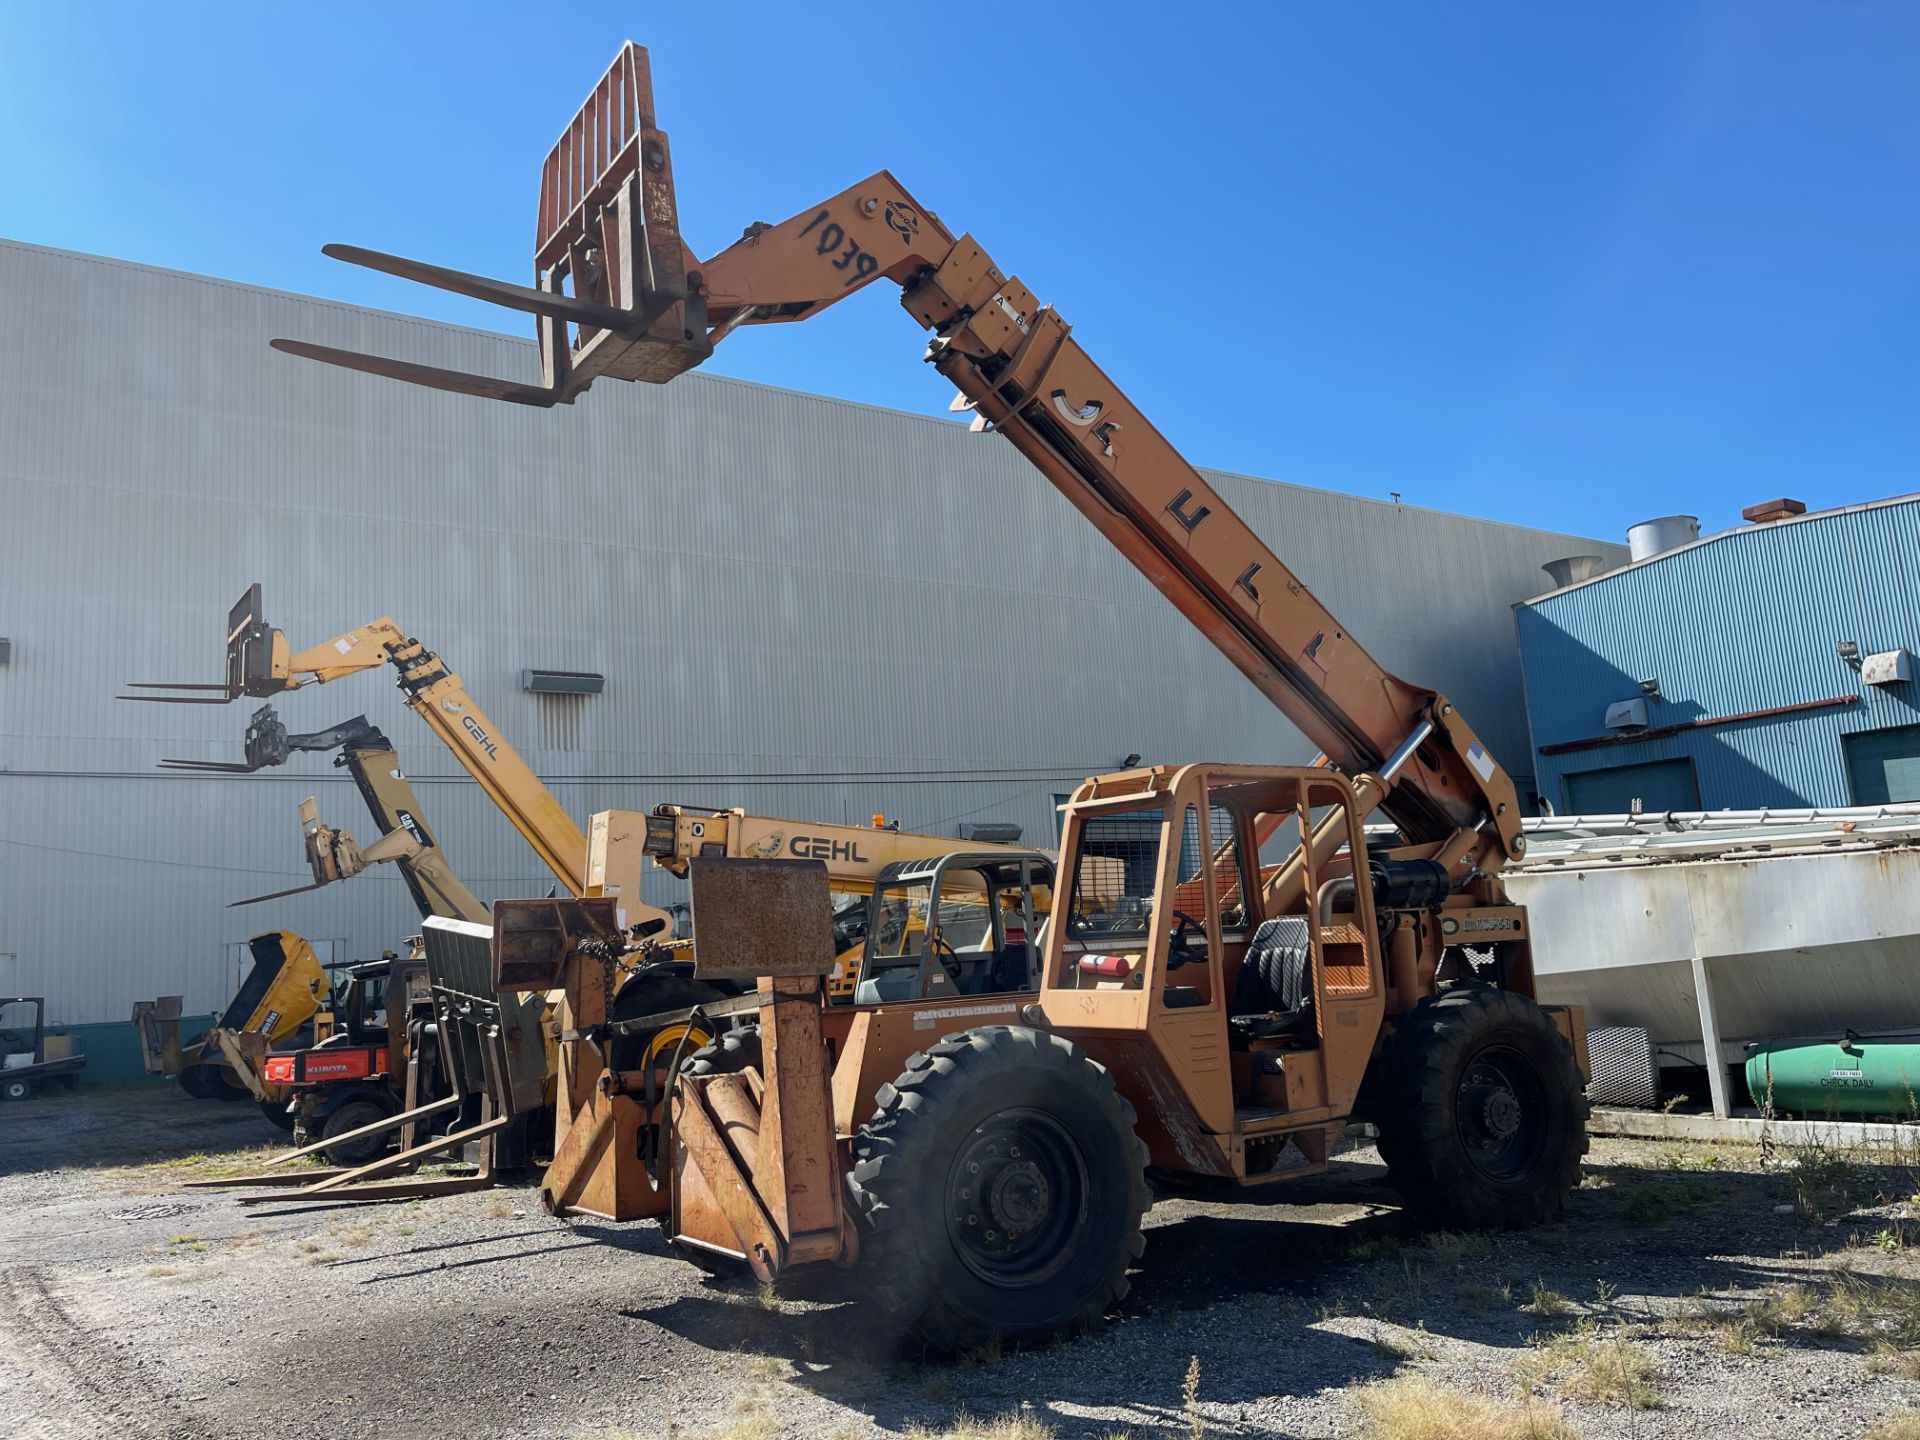 Lull 1044C054 10,000lb Telescopic Forklift - Located in Lester, PA